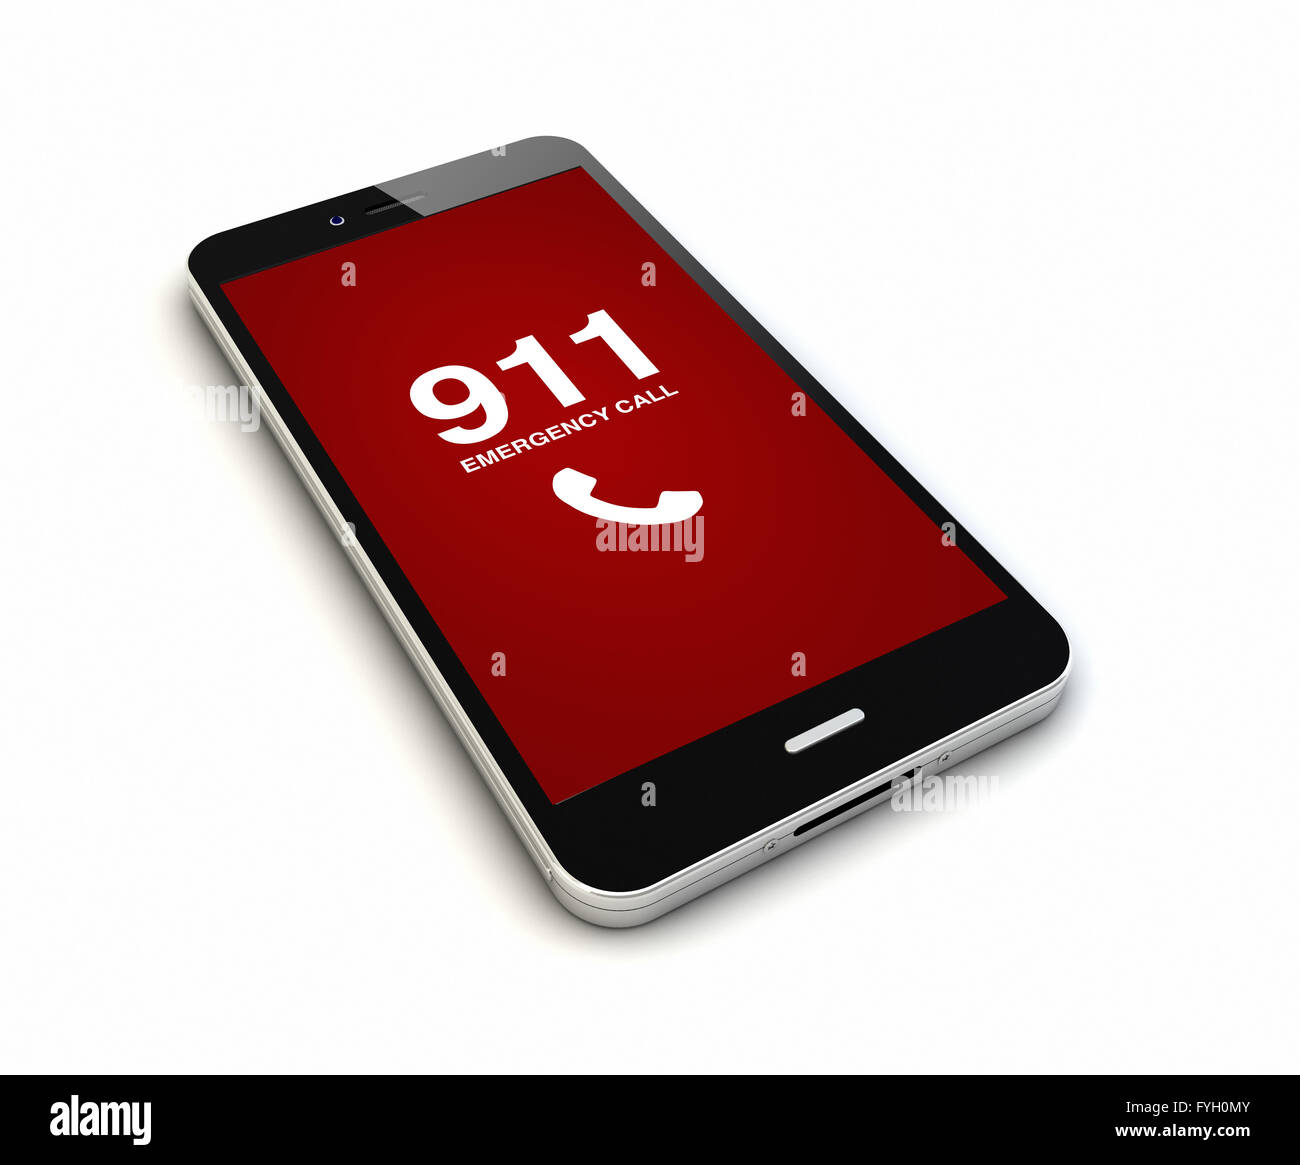 render of an original smartphone with emergency call on the screen. Screen graphics are made up. Stock Photo